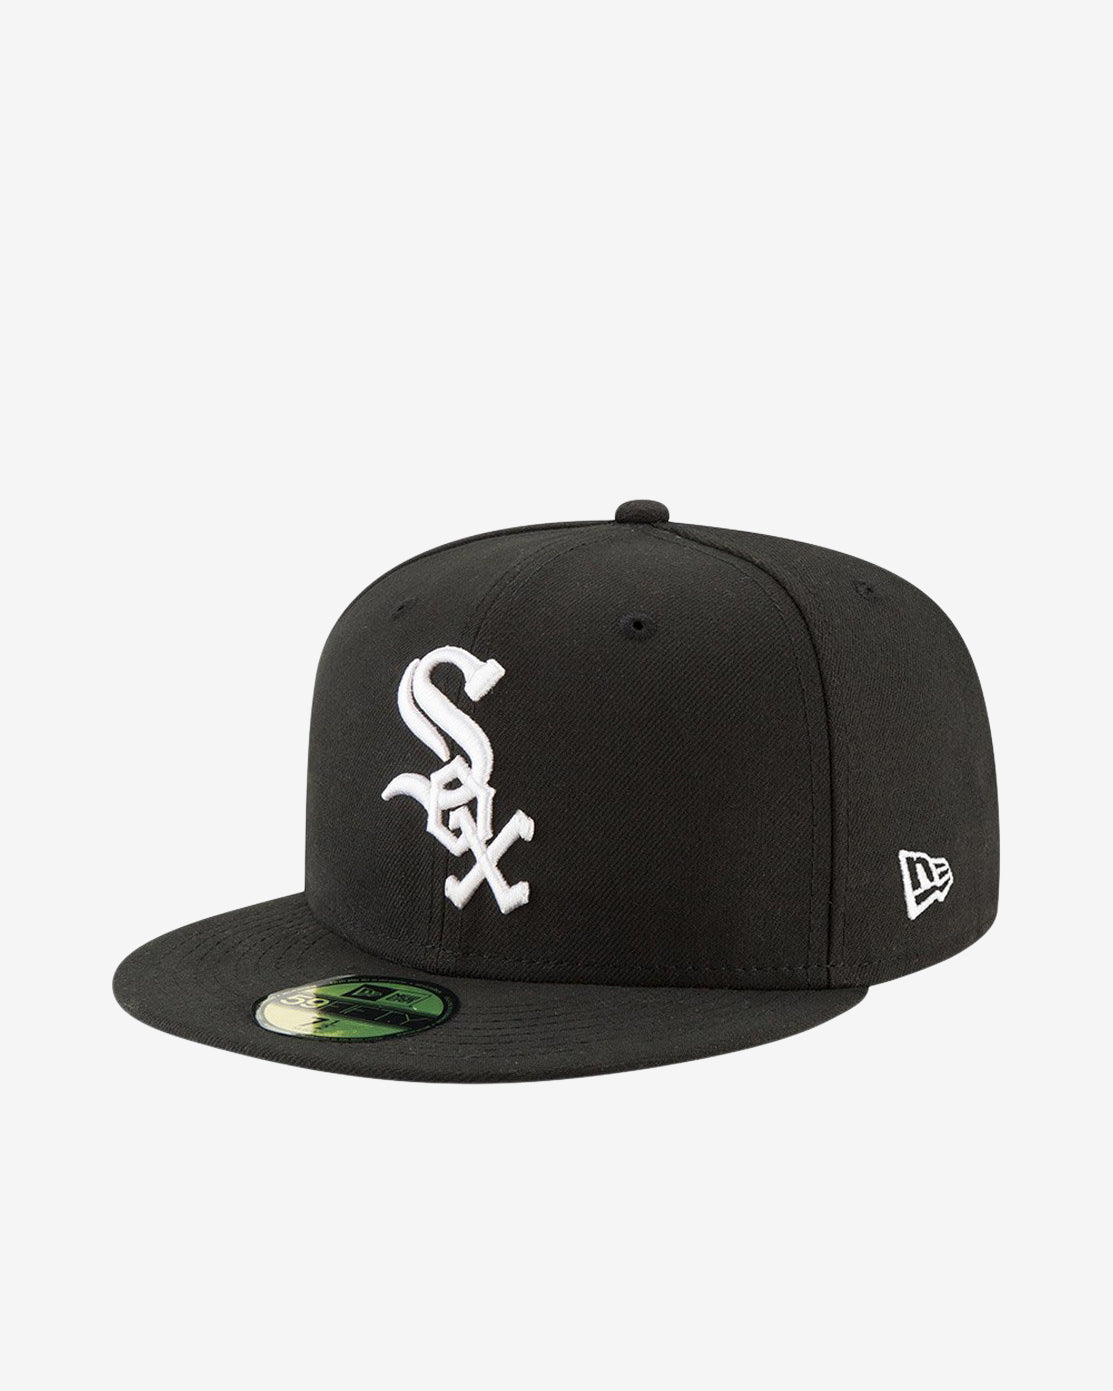 CHICAGO WHITE SOX ACPERF 59FIFTY - BLACK